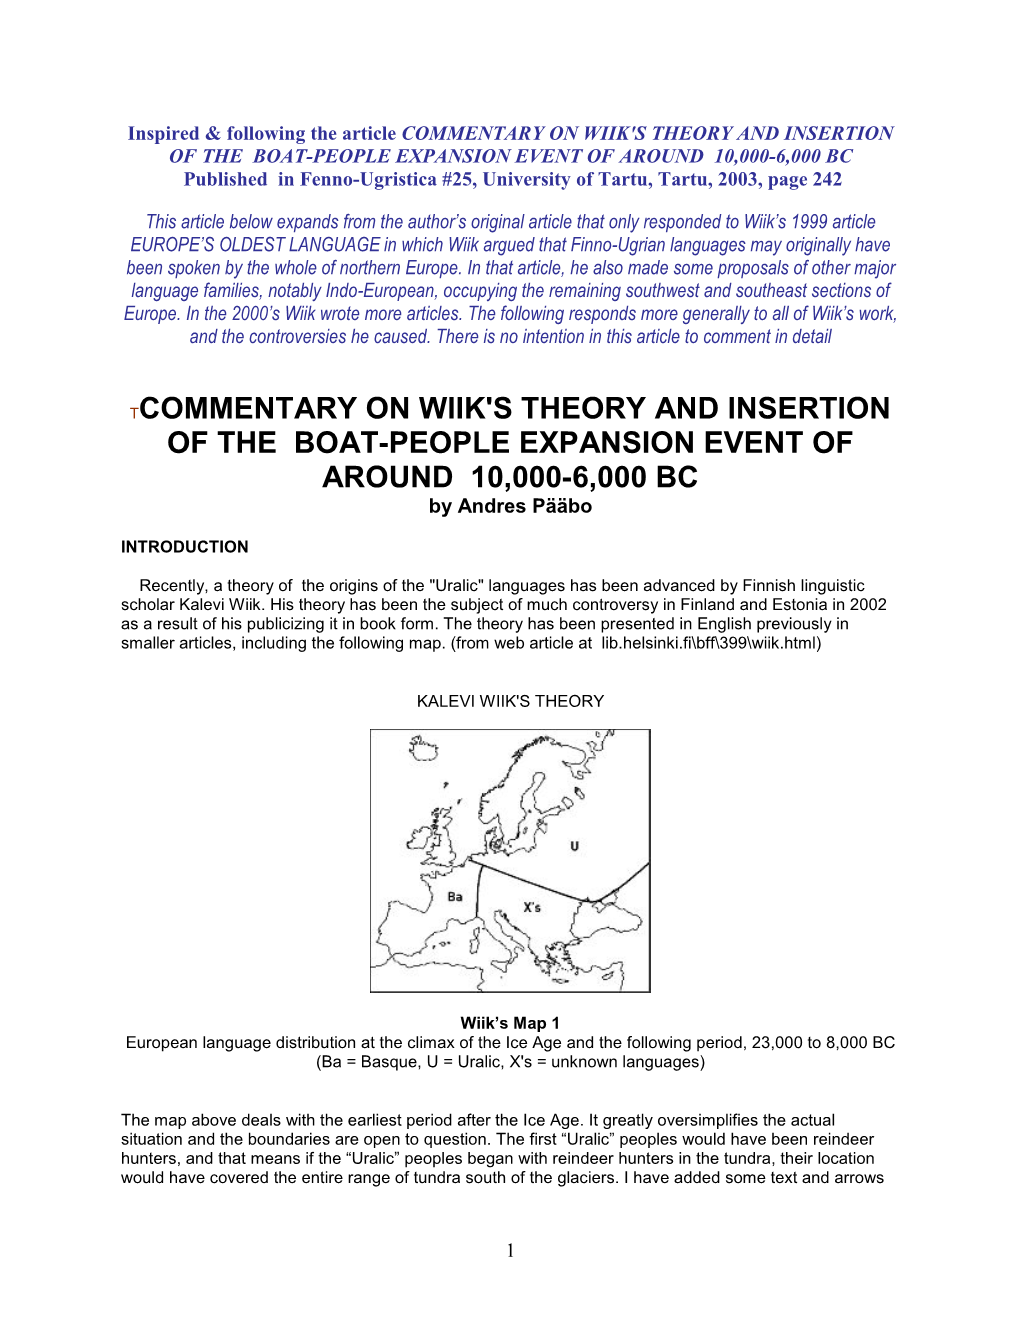 TCOMMENTARY on WIIK's THEORY and INSERTION of the BOAT-PEOPLE EXPANSION EVENT of AROUND 10,000-6,000 BC by Andres Pääbo